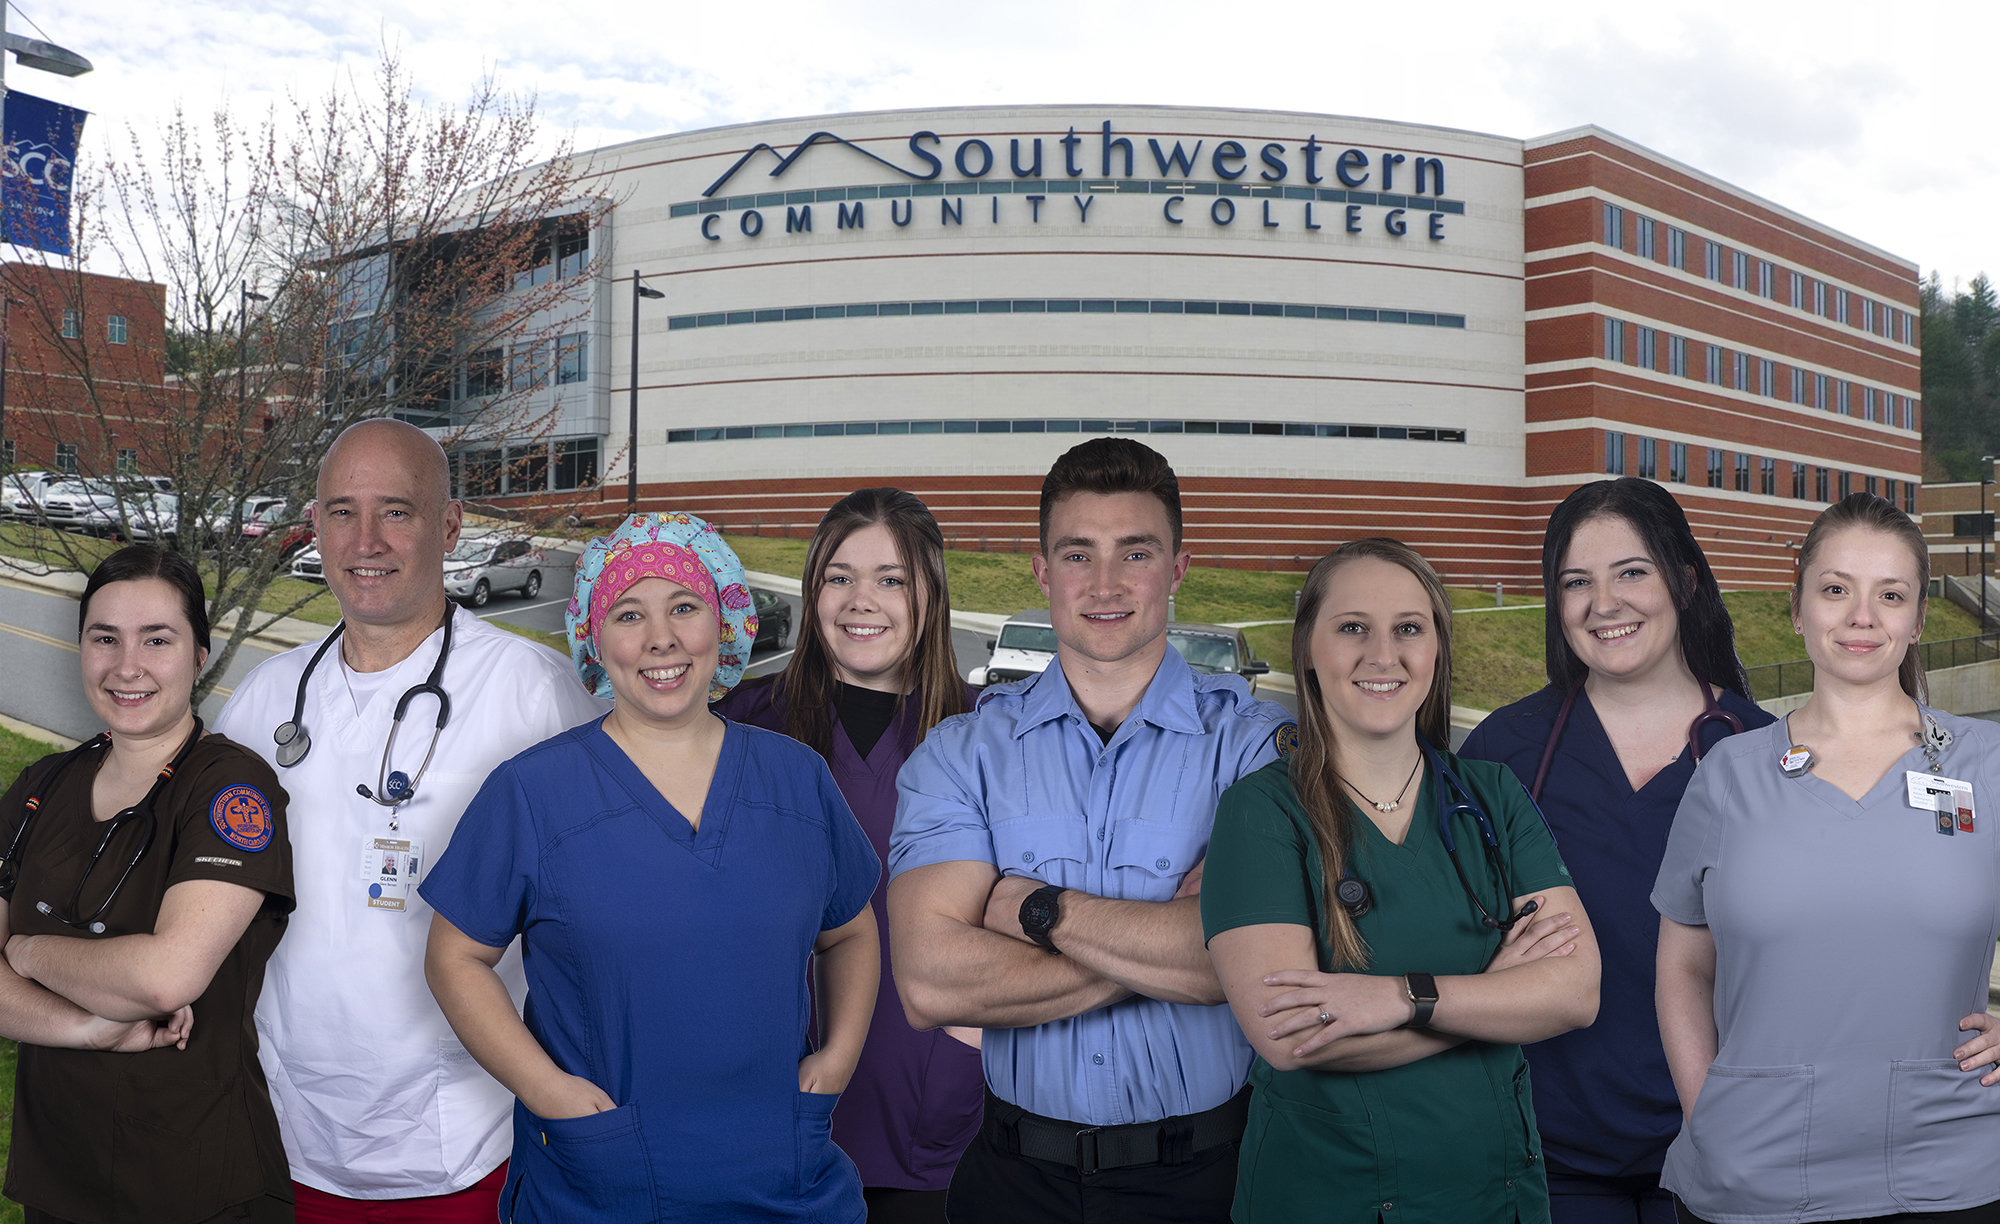 Harris Regional & Swain Community Hospitals are offering a new “Healthcare Scholars” program that will provide last-dollar tuition and other financial support for SCC students in the Health Sciences fields represented in this photo. Pictured here are, from left: Ariel Chambers-Frizzell (Nurse Aide) of Sylva; Glenn Barnett (Nursing) of Robbinsville; Brittany Luker (Surgical Technology) of Cullowhee; Jordan Nelon (Medical Sonography) of Waynesville; Mitch Wike (EMS) of Cullowhee; Holly Parton (Respiratory Therapy) of Waynesville; Destiny Hall (Medical Assisting) of Bryson City and Kelsey Starr Hill (Radiography) of Sylva).